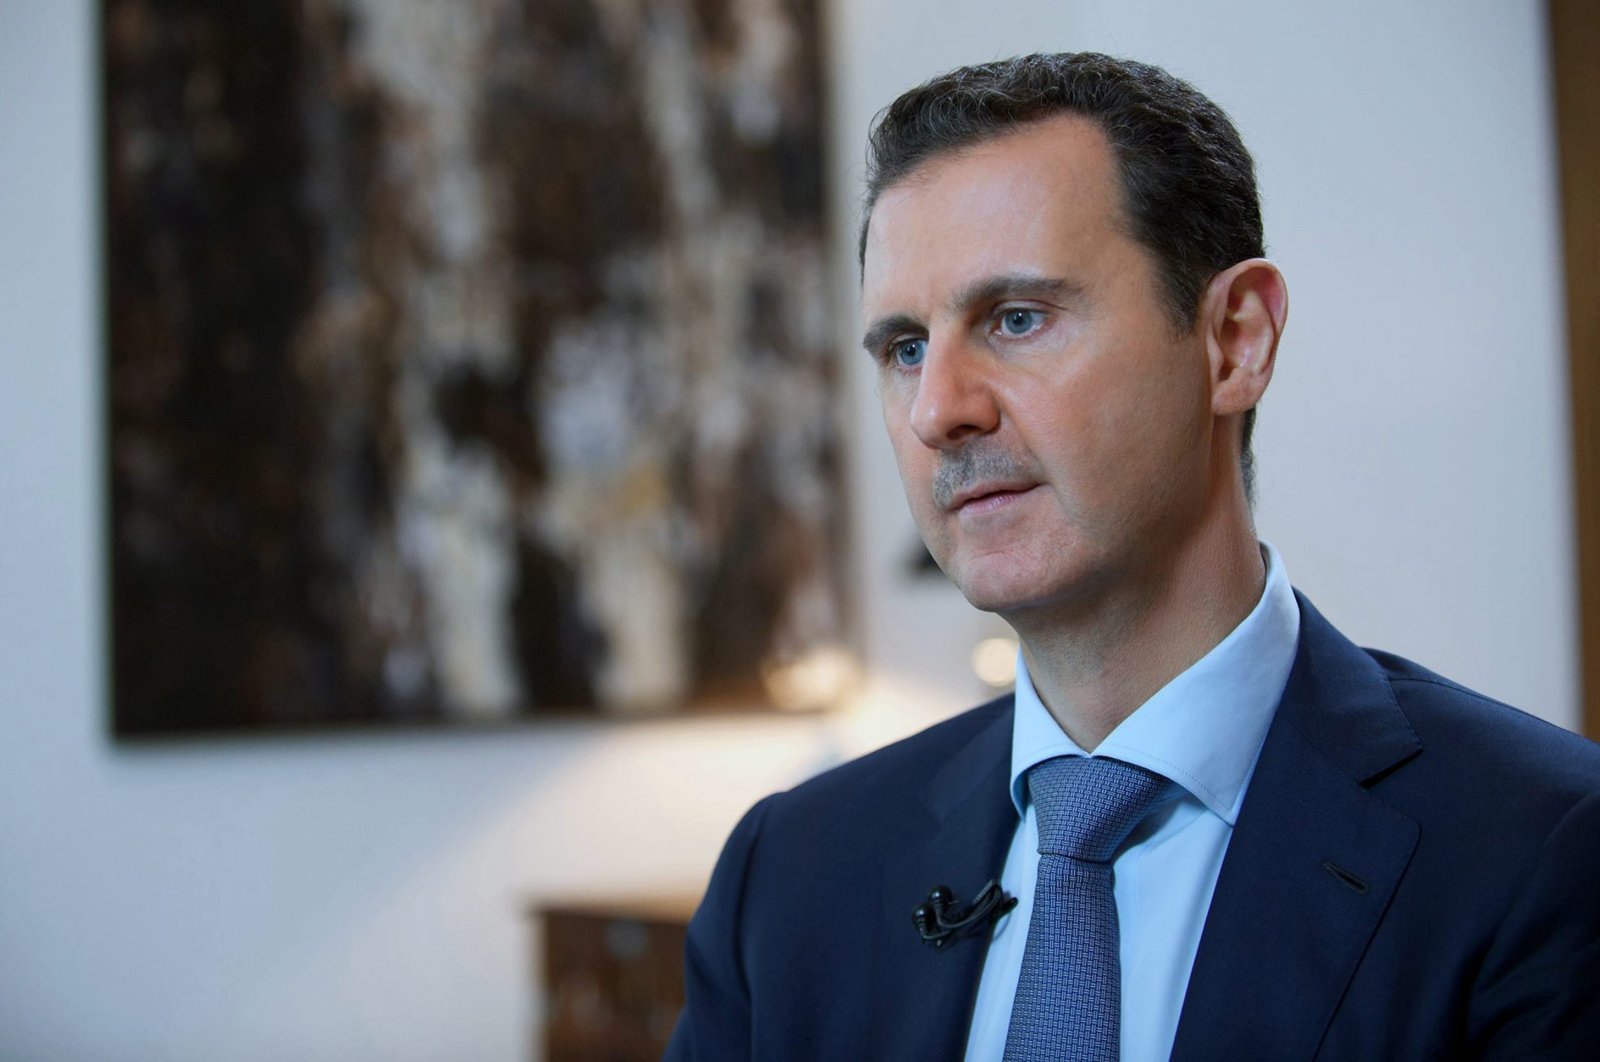 Bashar Assad, speaking during an interview with Iran's Khabar TV, in Damascus, Syria on Oct. 4, 2015. (AP Photo)